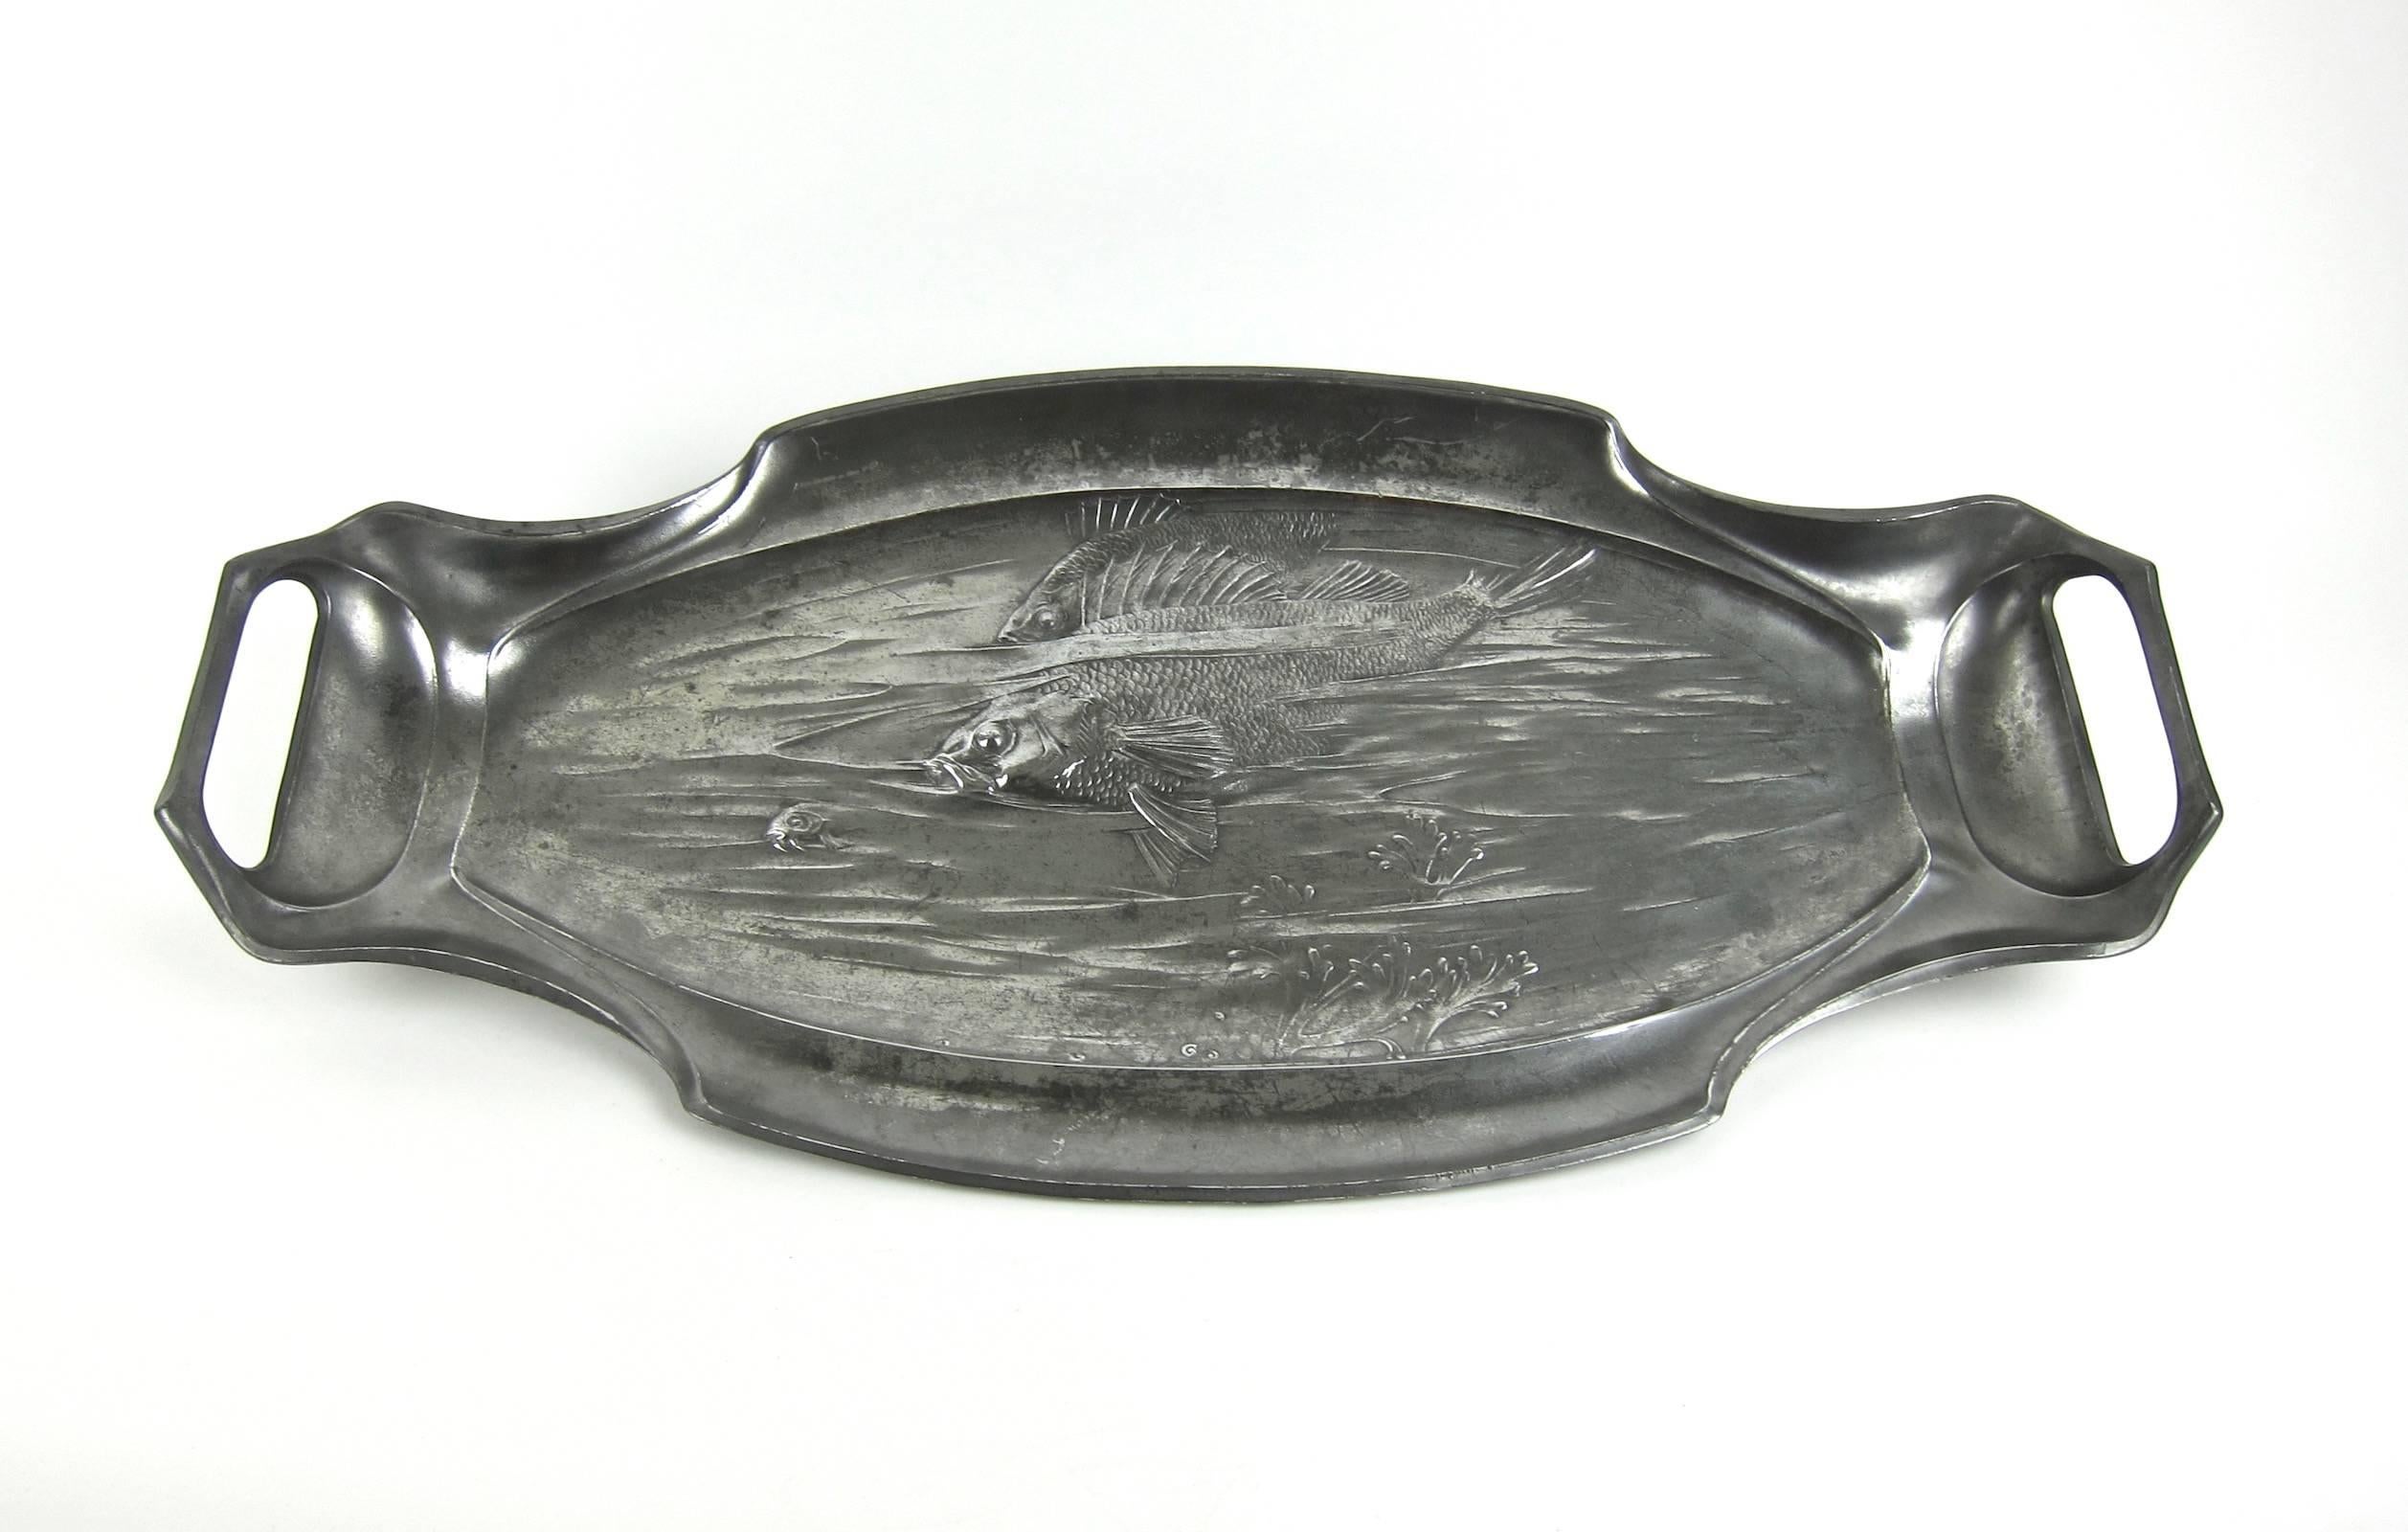 An extraordinarily large and heavy two-handled antique pewter platter produced by Orivit-AG of Germany, circa 1900. The Jugendstil decoration consists of an underwater scene in relief depicting three Art Nouveau fish swimming across the silvery-gray